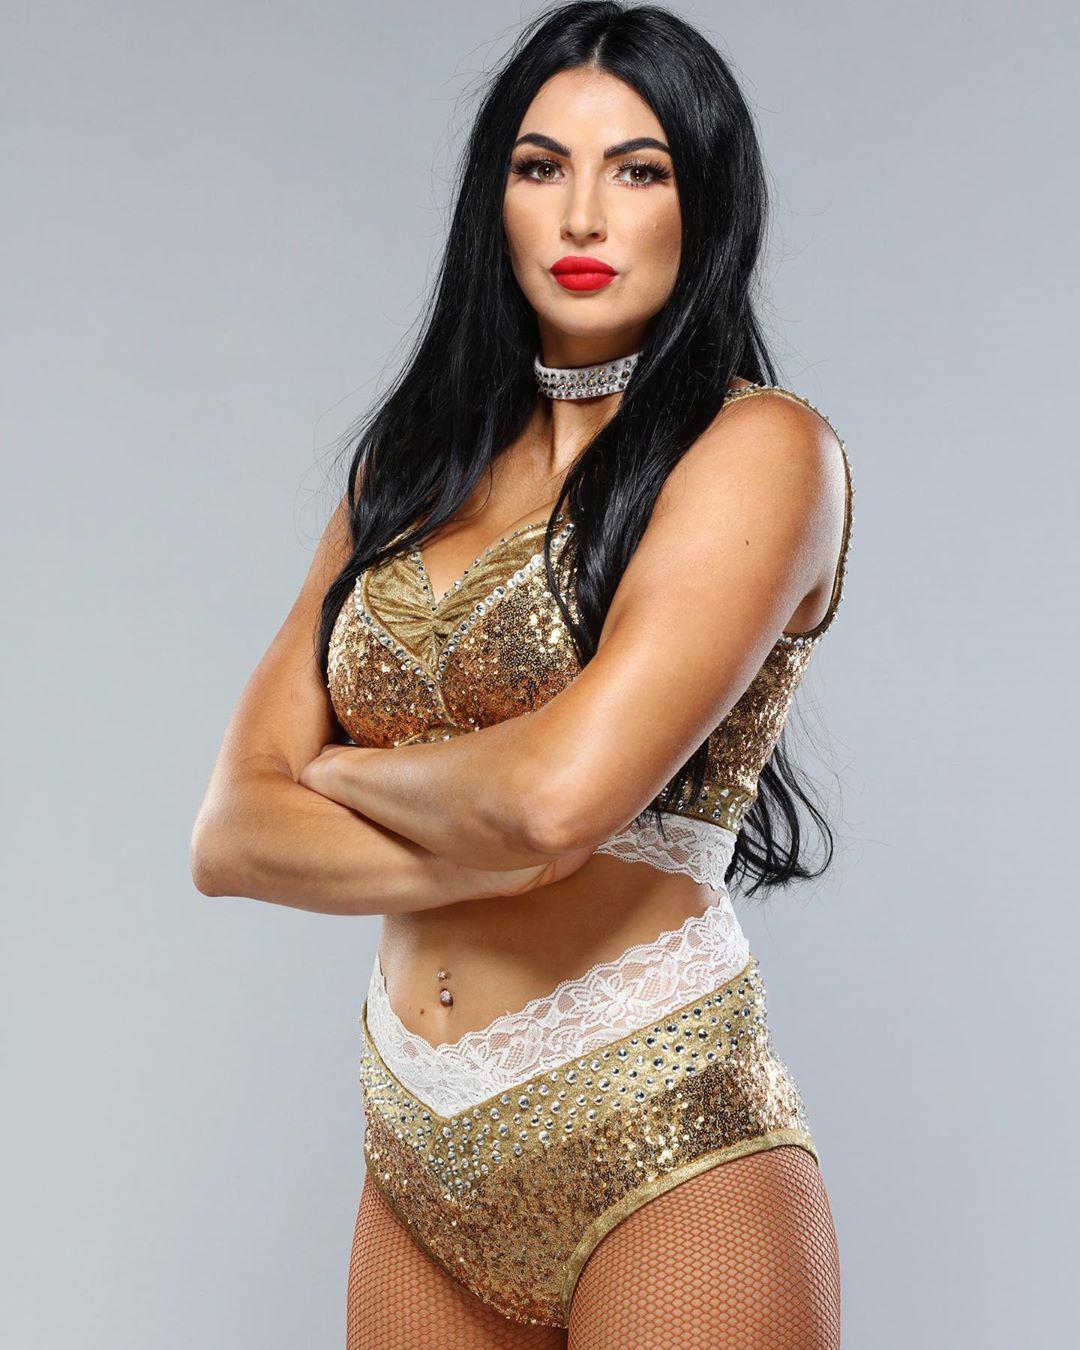 60+ Hot Pictures Of Billie Kay Will Rock The WWE Fan Inside You 385